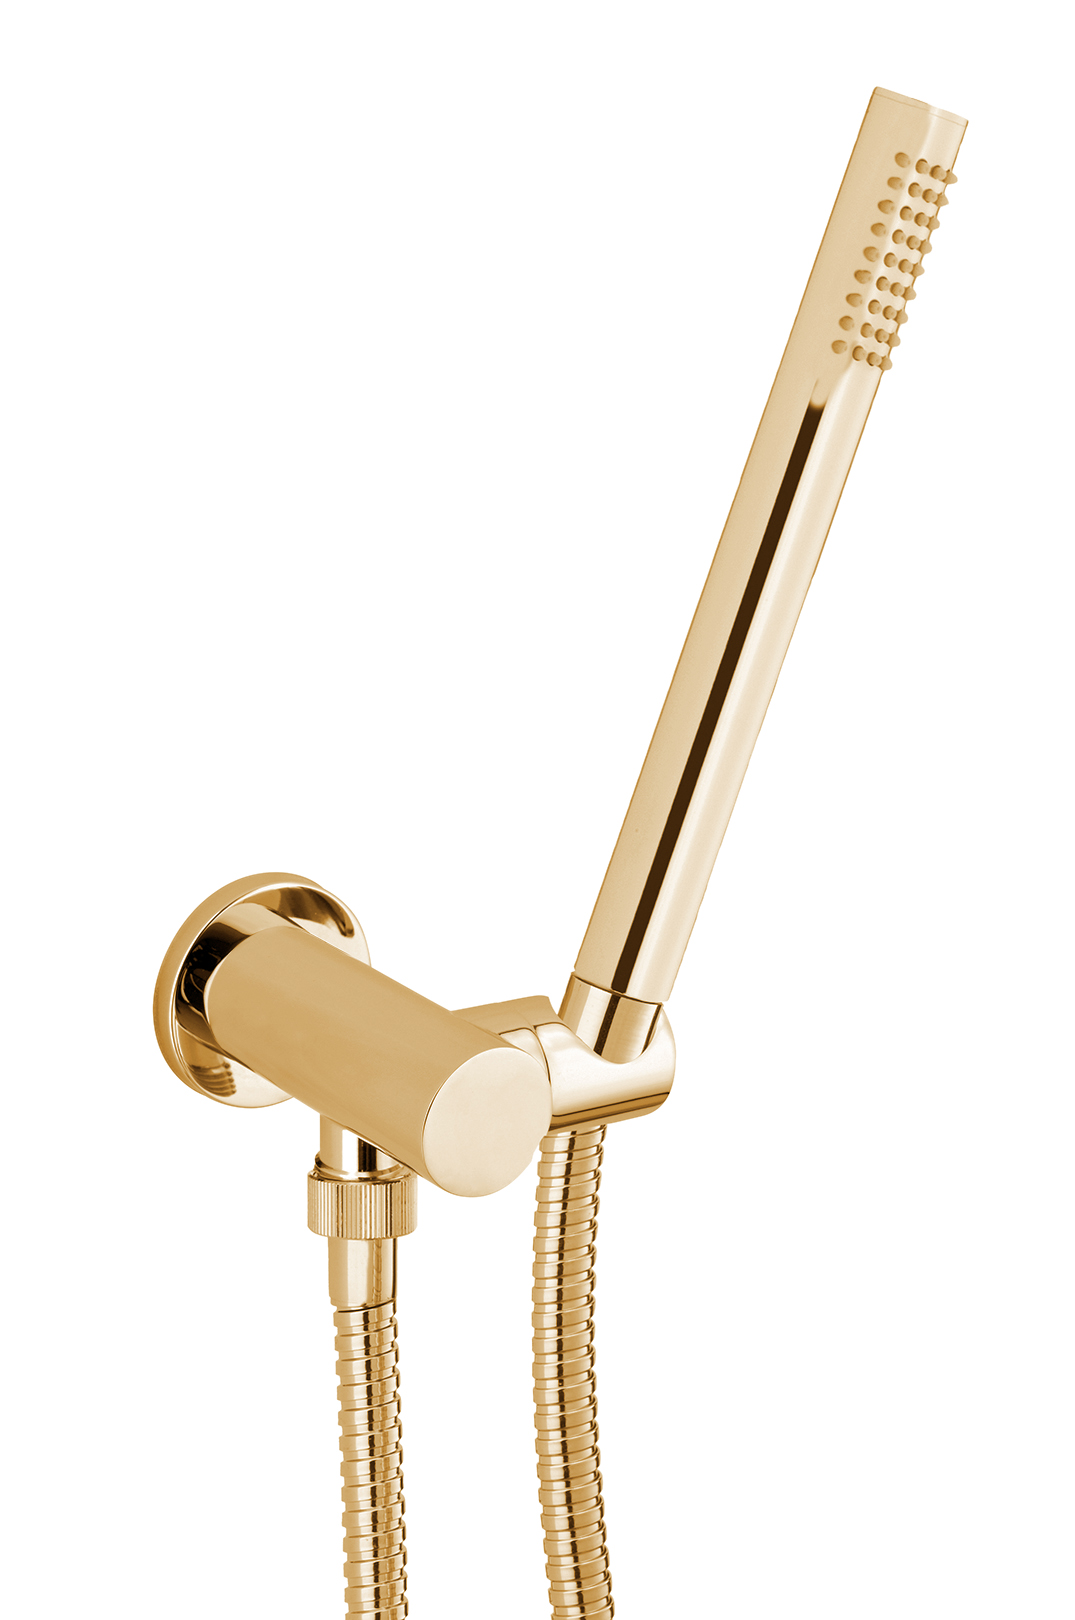 Wall water outlet with support,
flexible and brass hand shower, gold